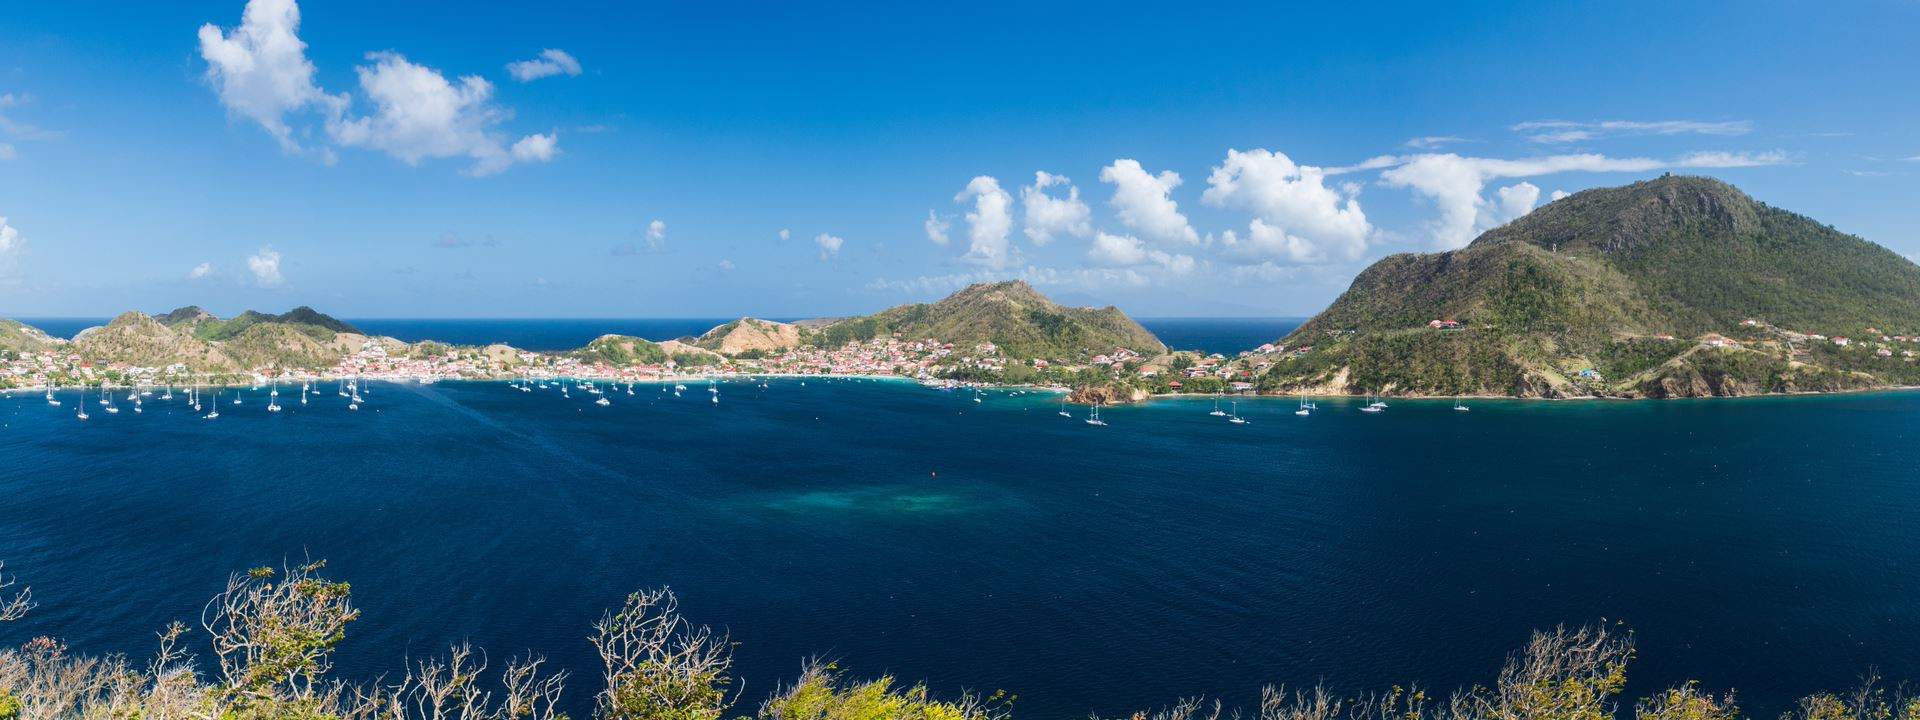 The West Indies, the perfect place to learn how to sail